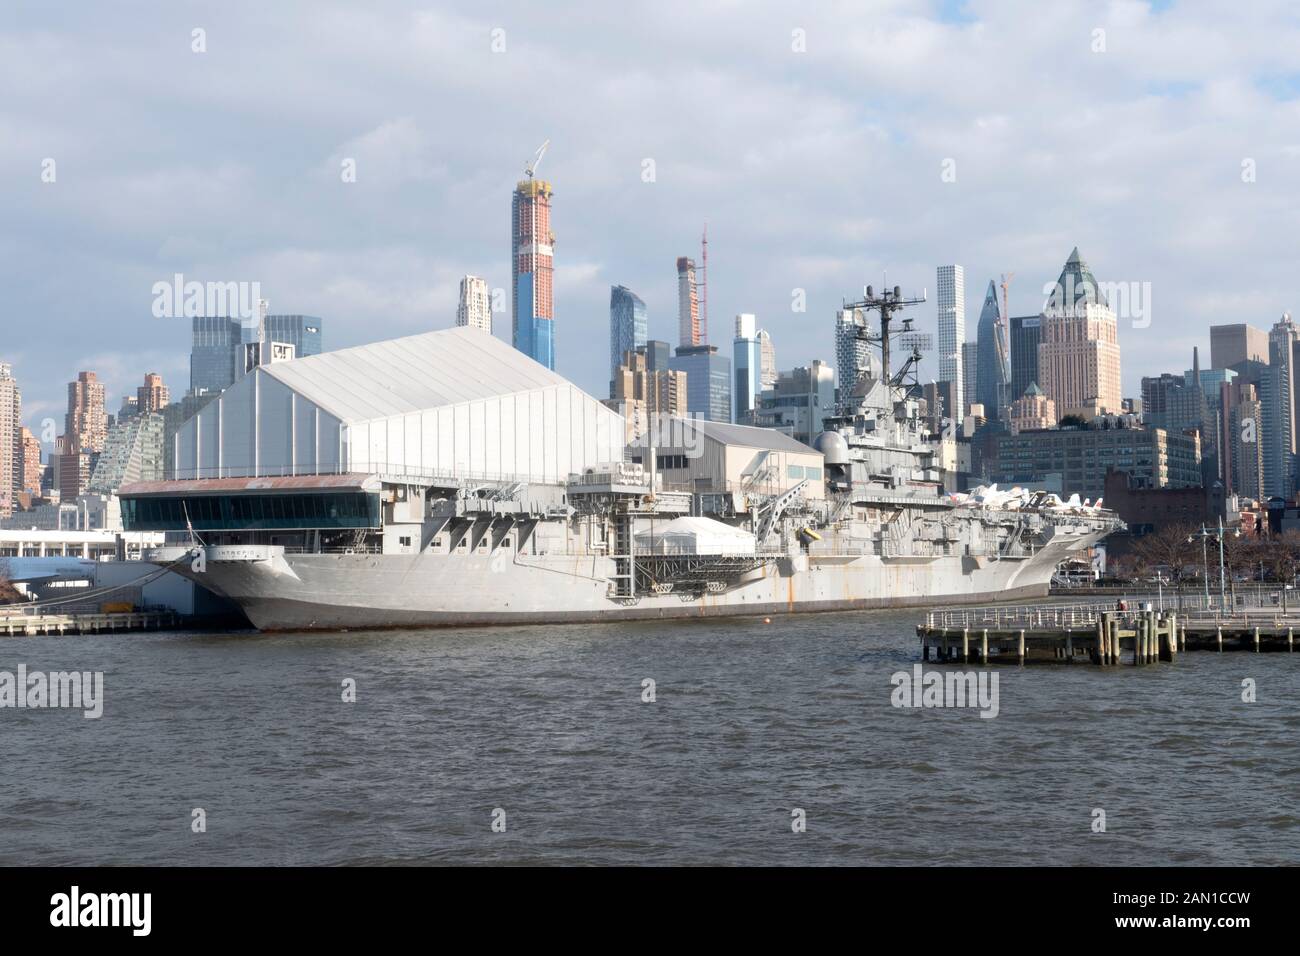 The Intrepid Sea, Air & Space Museum, New York City, United States of America 2018. Stock Photo